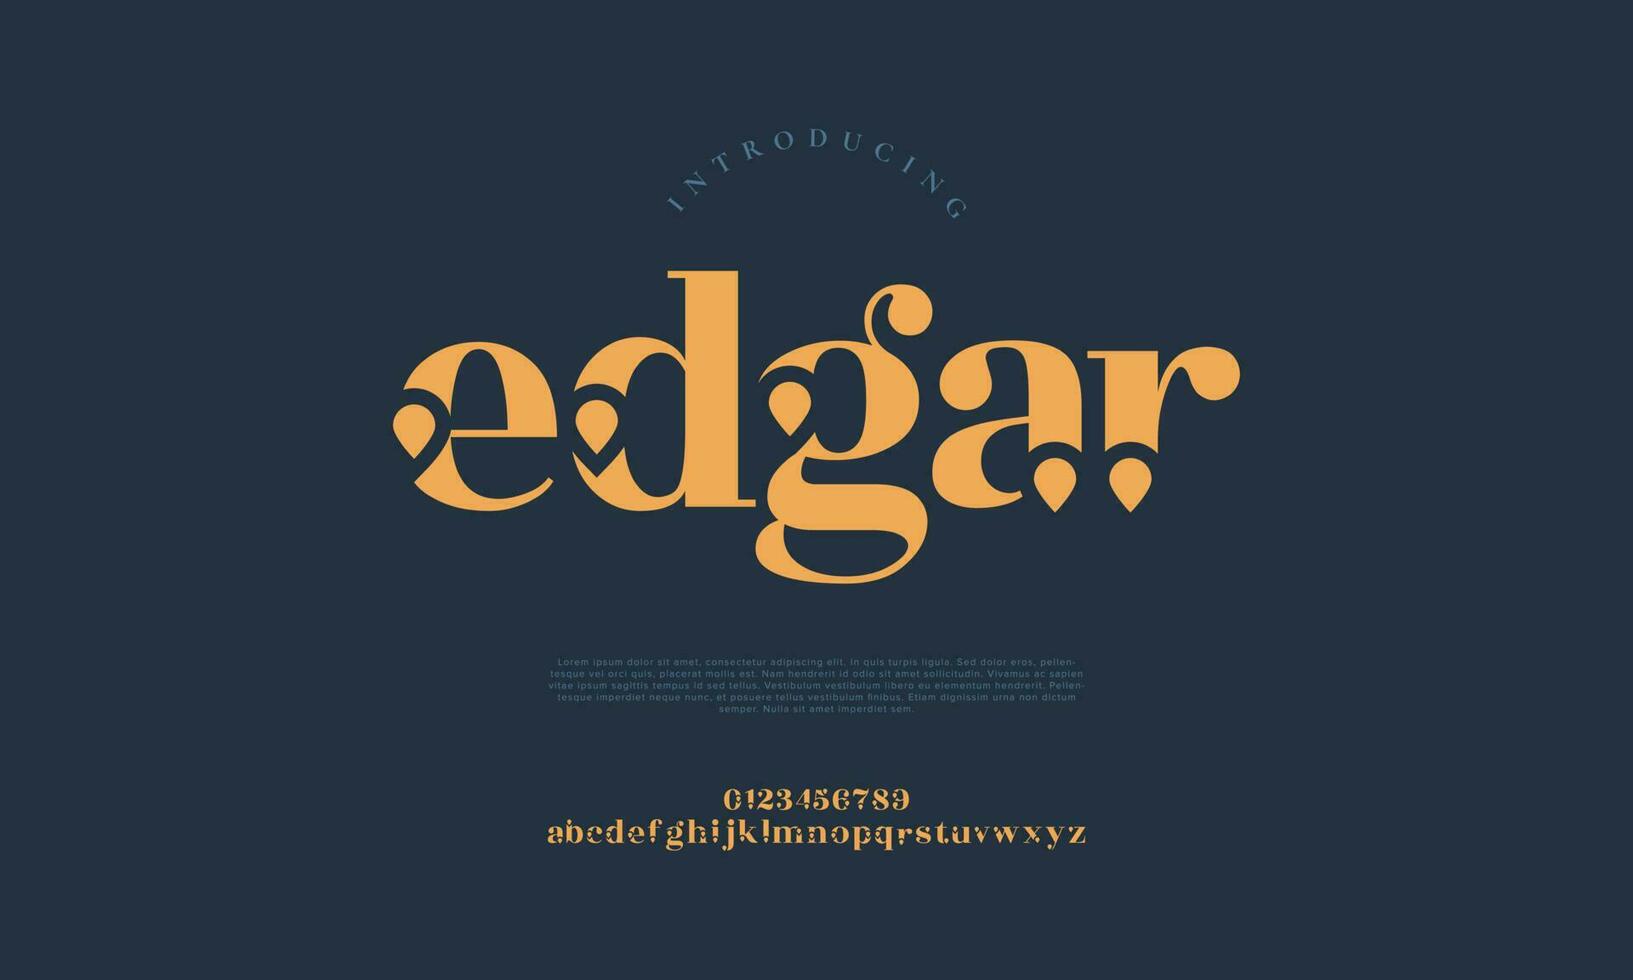 Edgar abstract digital technology logo font alphabet. Minimal modern urban fonts for logo, brand etc. Typography typeface uppercase lowercase and number. vector illustration